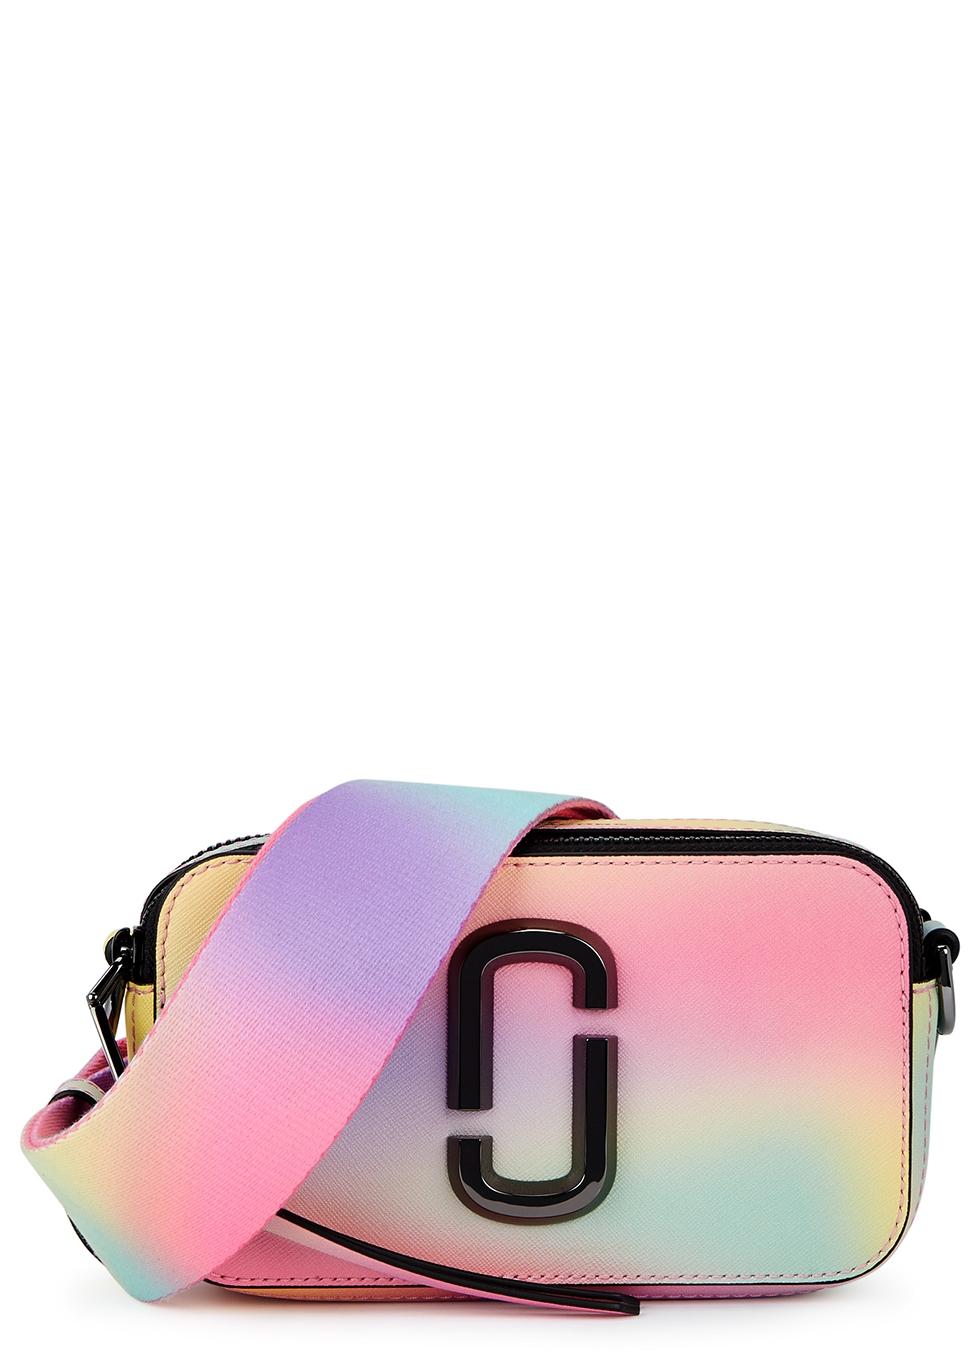 Marc Jacobs The Snapshot Airbrush Bag at FORZIERI